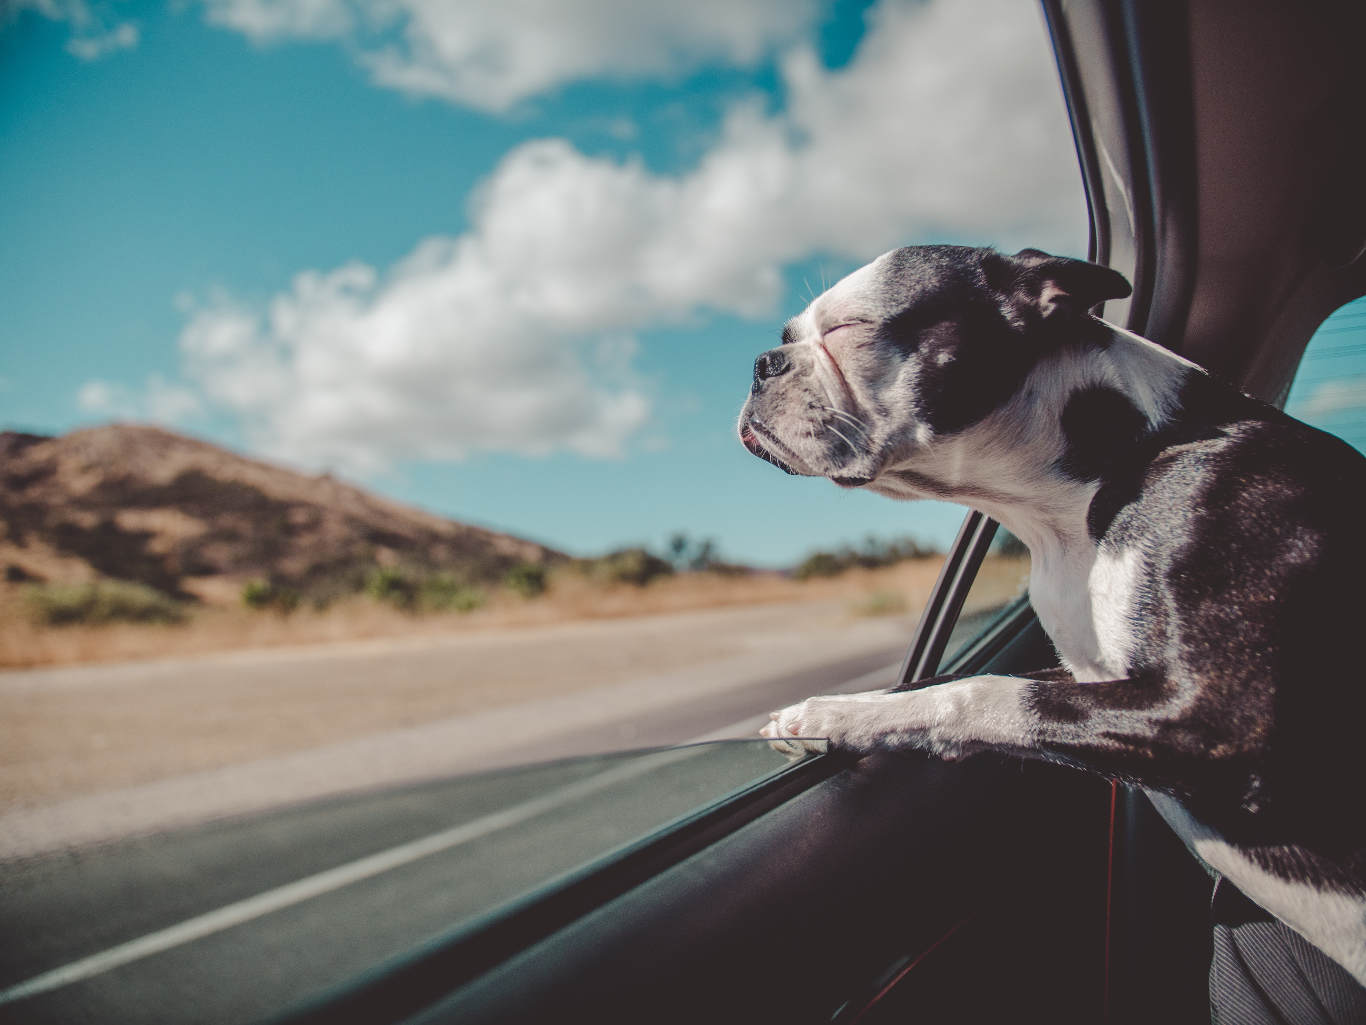 Hot car safety tips to keep your dog and family safe.